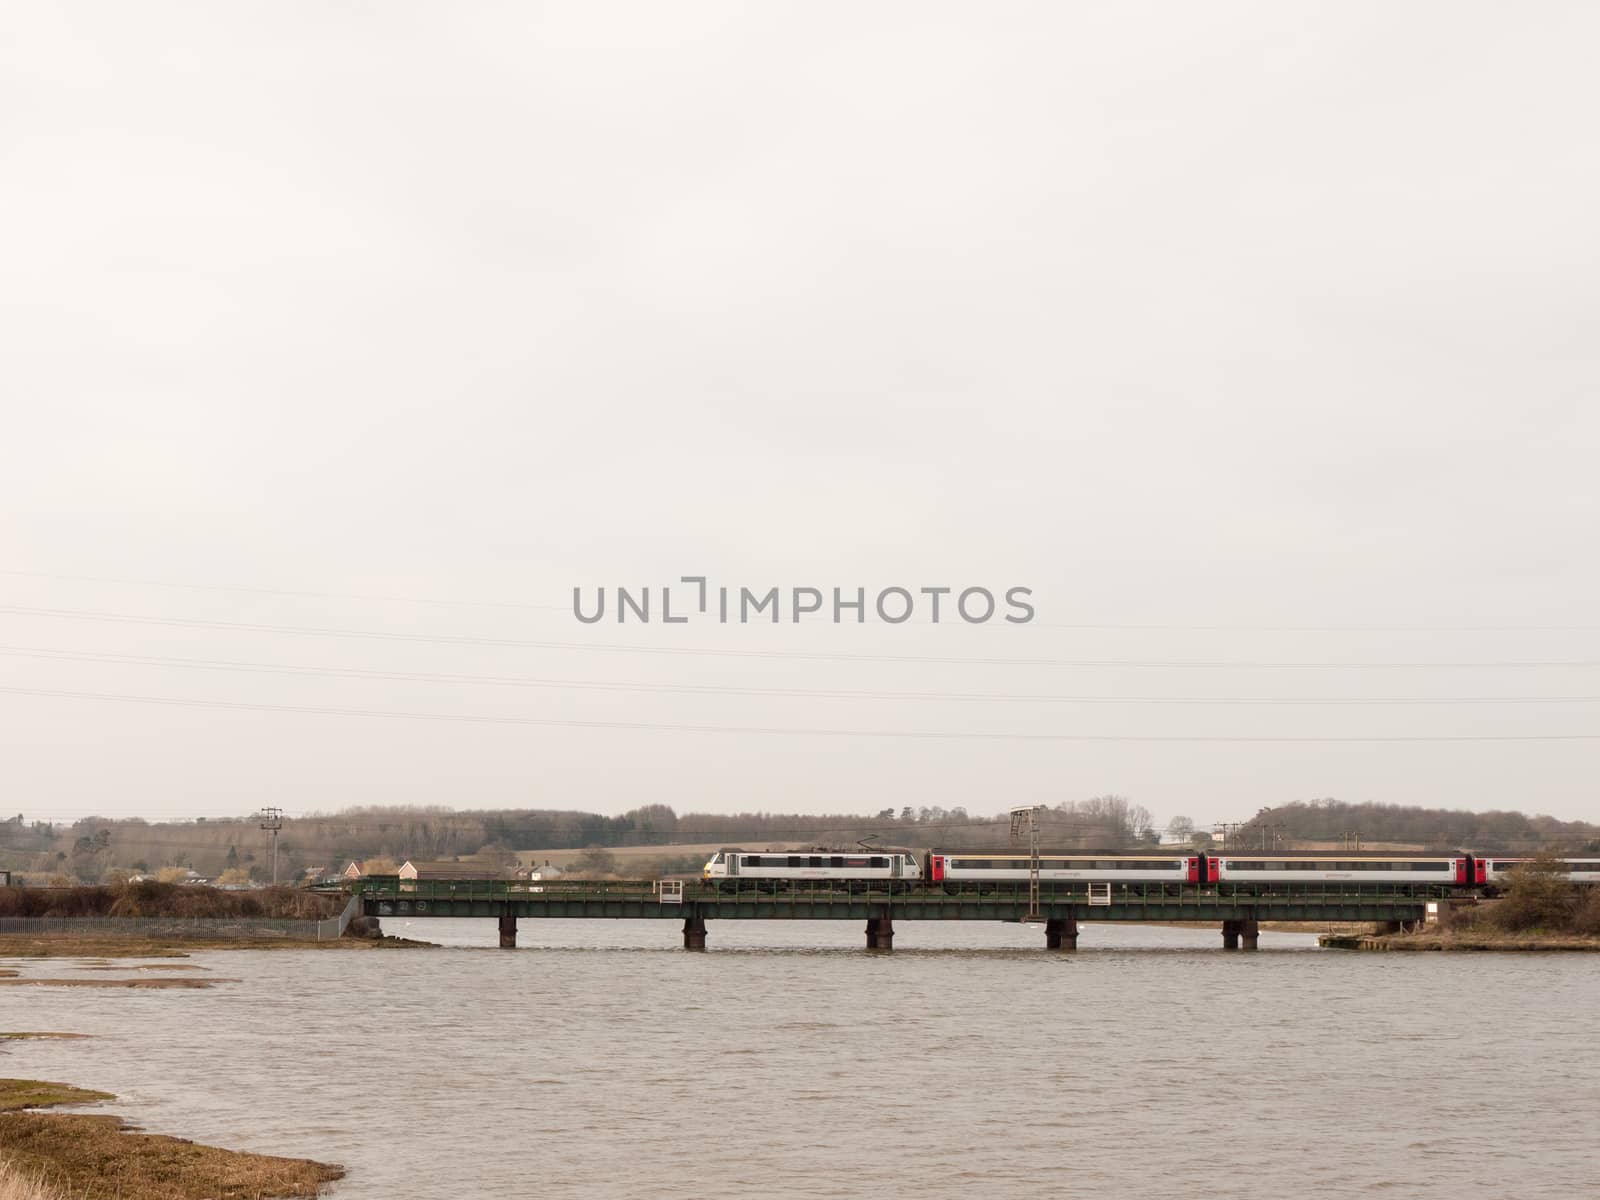 moving train blur motion on bridge across river large sky open space by callumrc